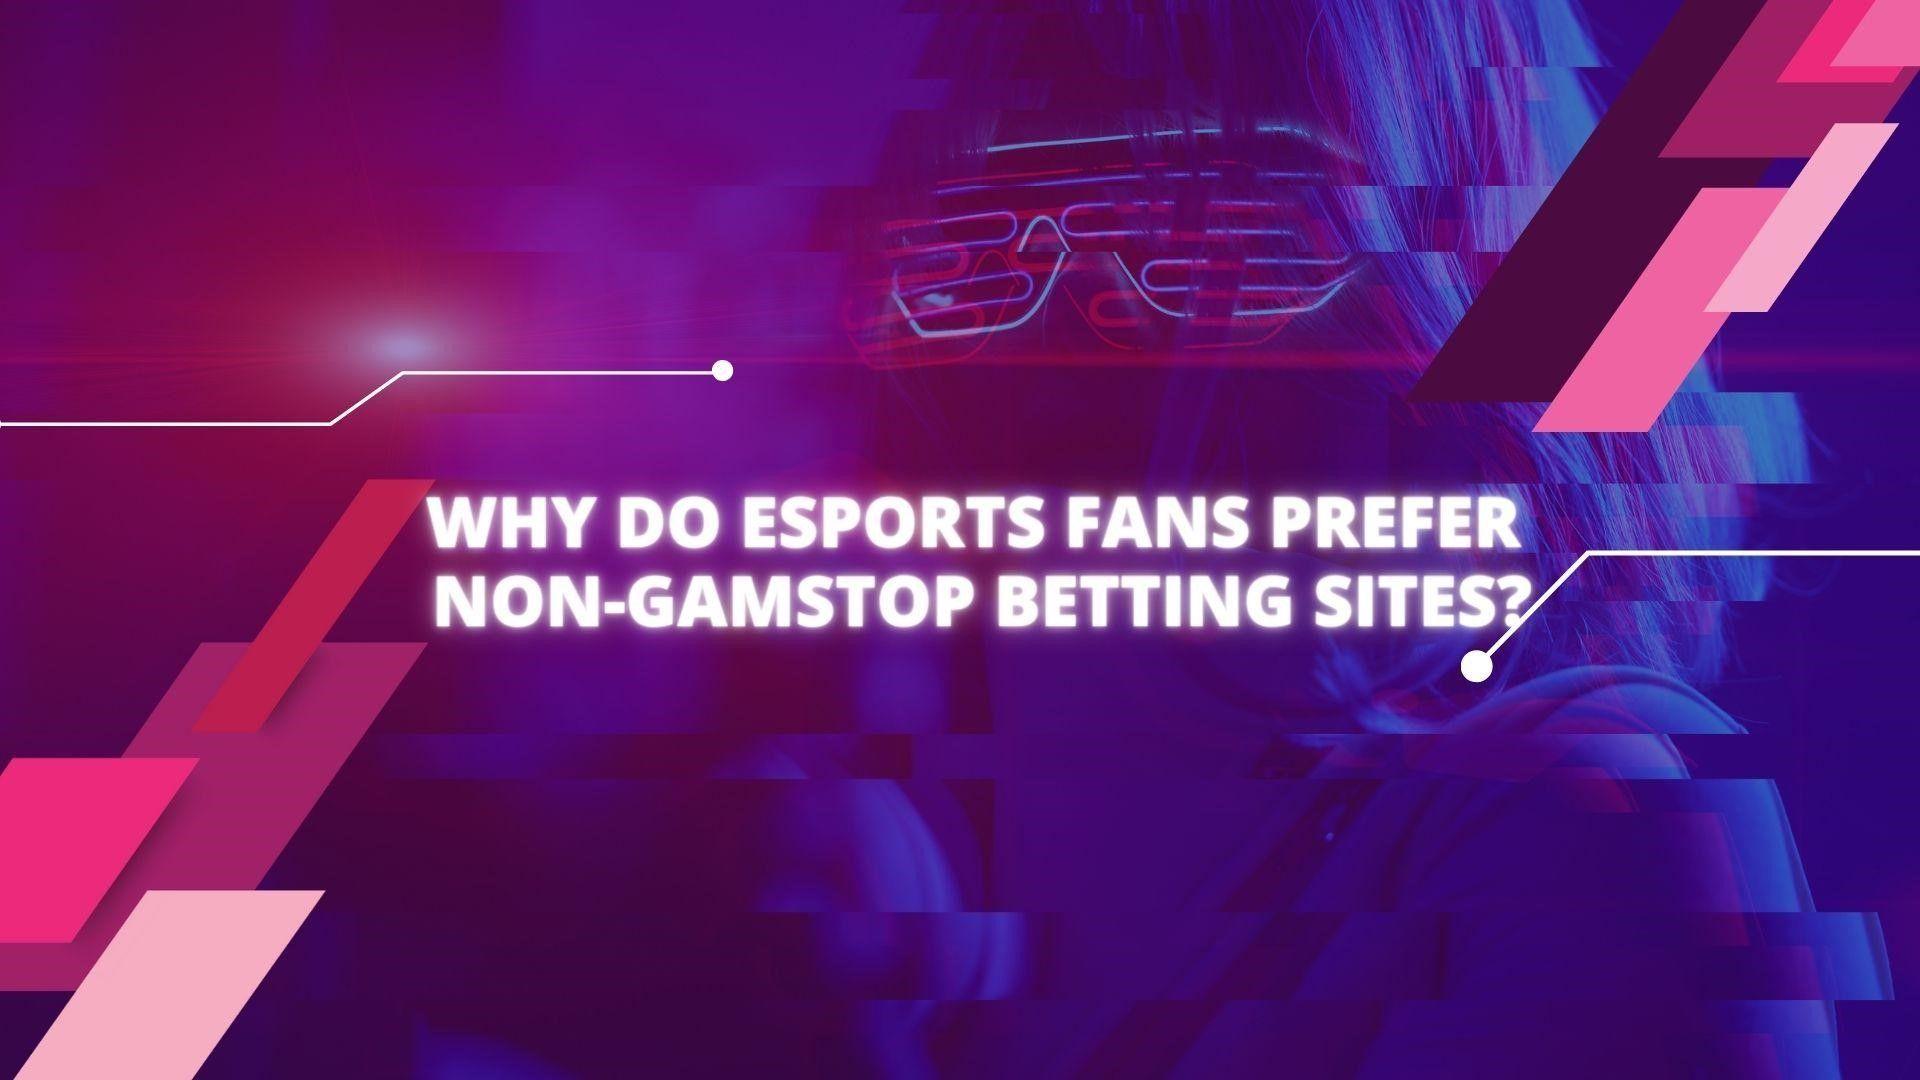 Why Do Esports Fans Prefer Non-GamStop Betting Sites?